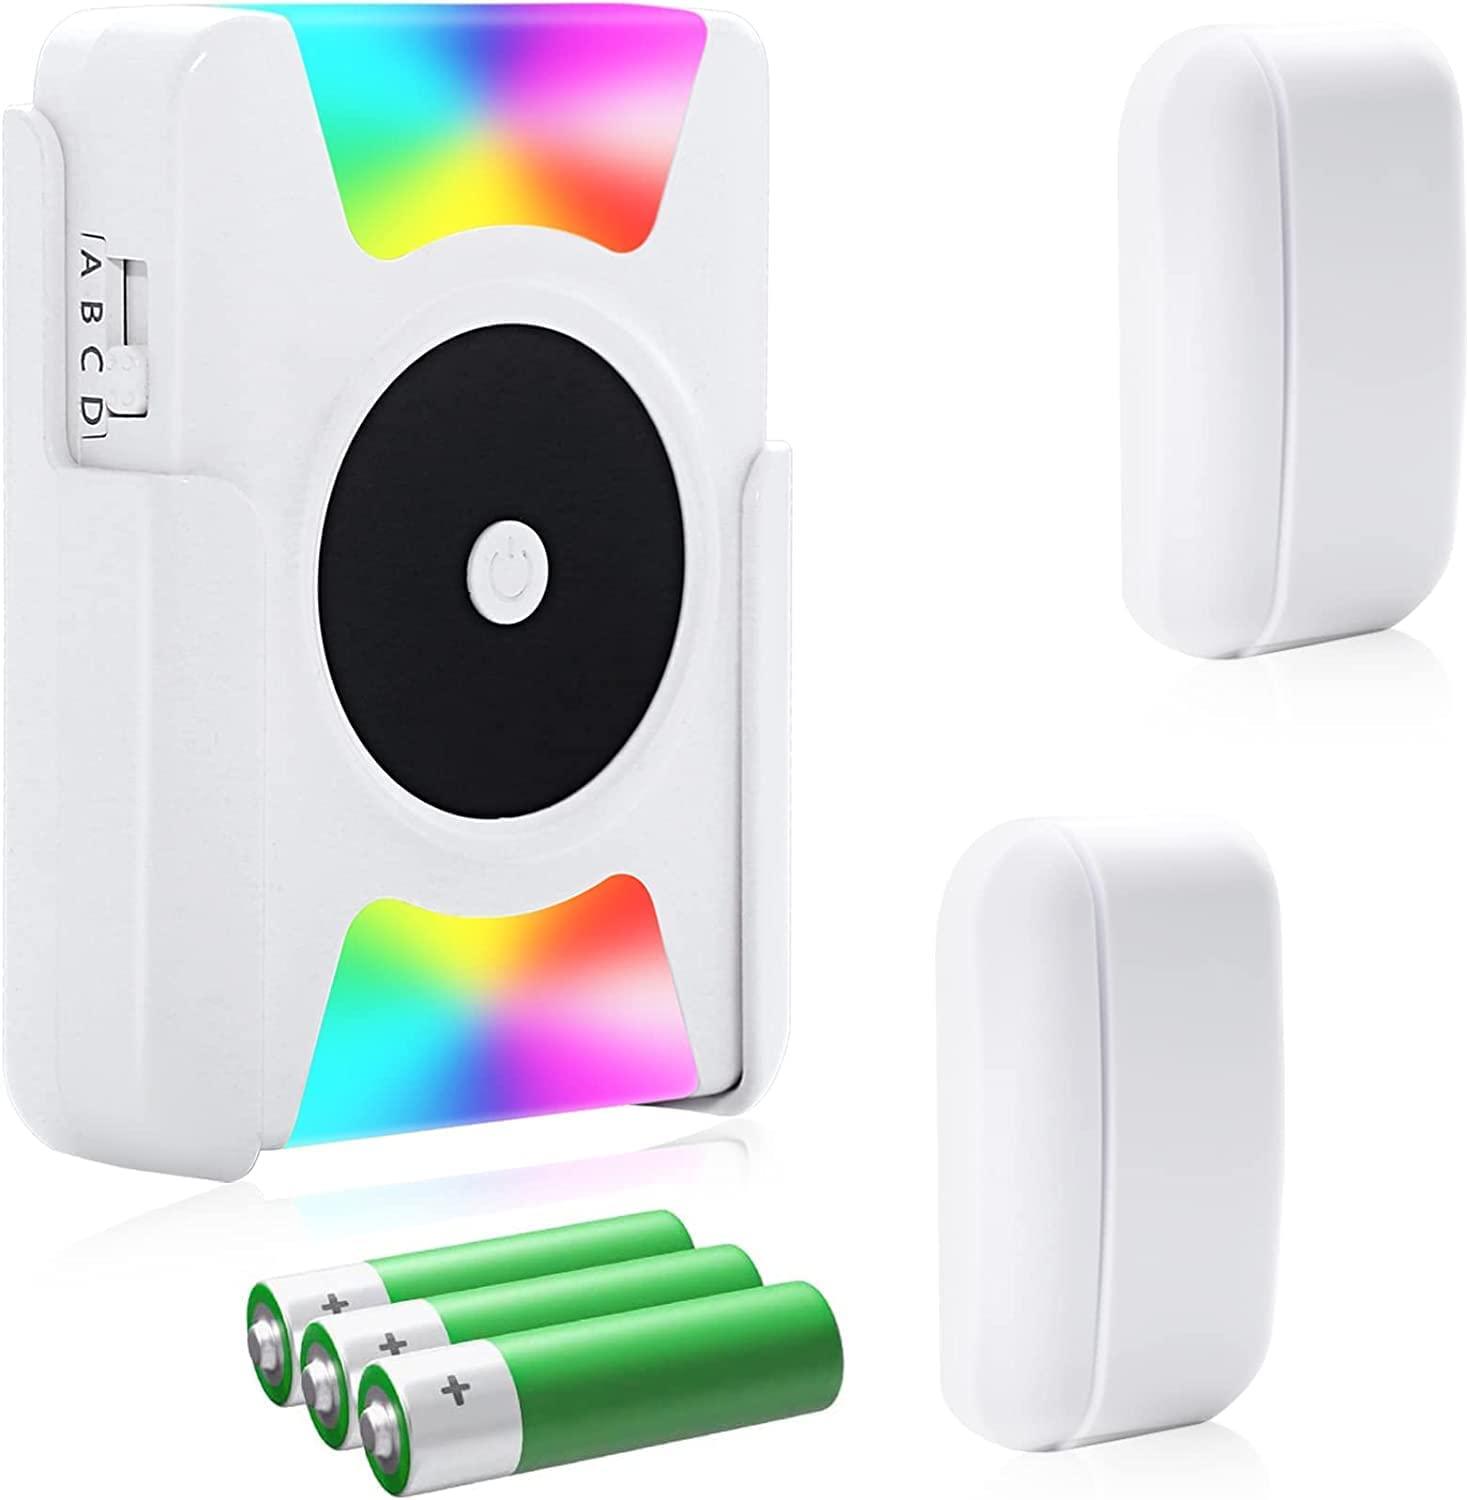 CallToU Portable Battery-powered Vibrating Receiver with Flashing LED